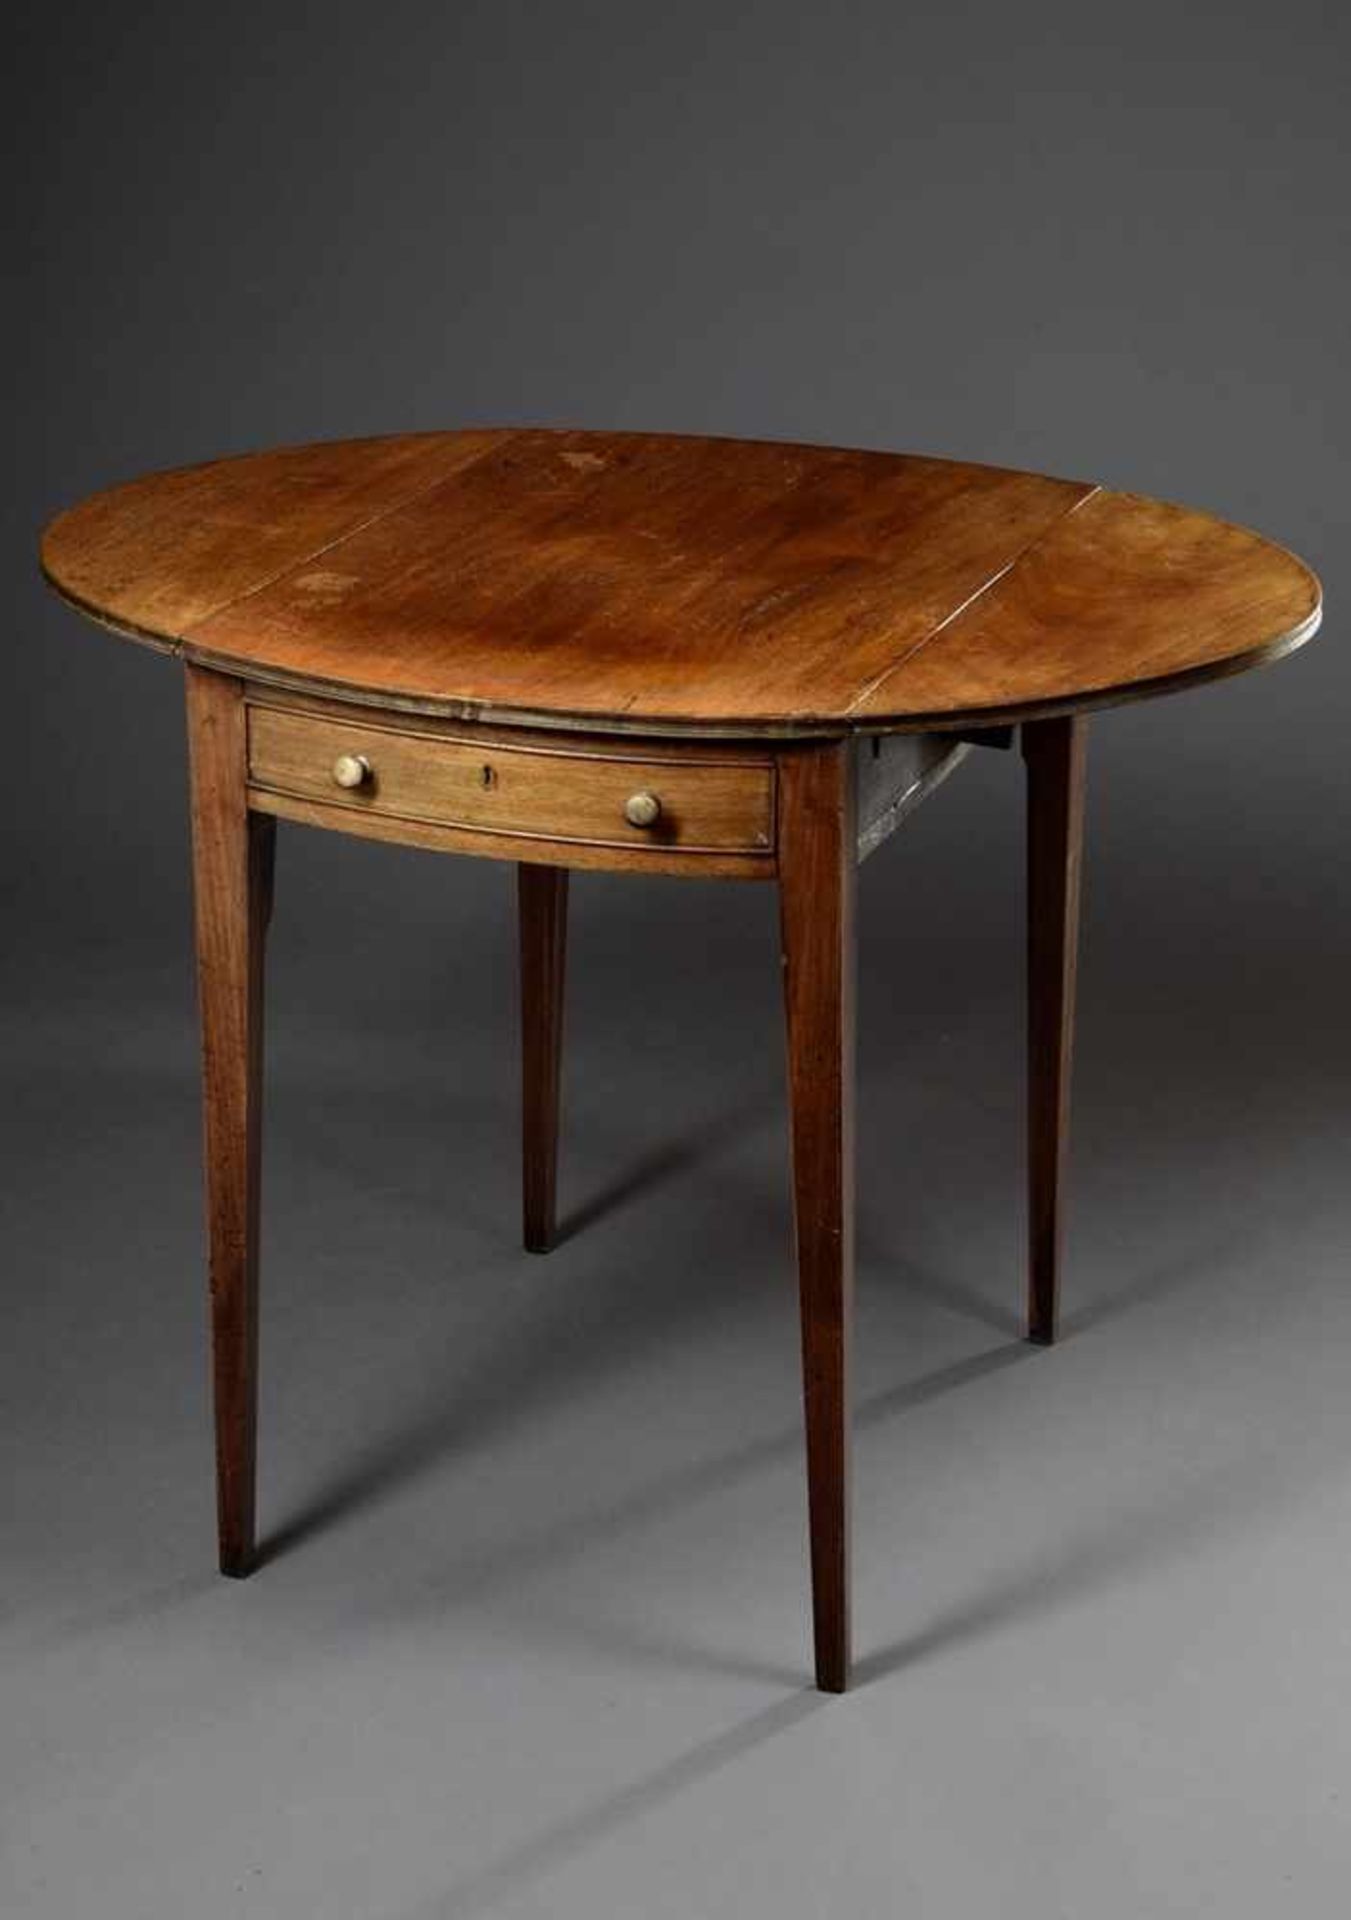 English mahogany pembroke table with semicircular side flaps and 2 drawers, 19th century, 71x47(95) - Image 2 of 4